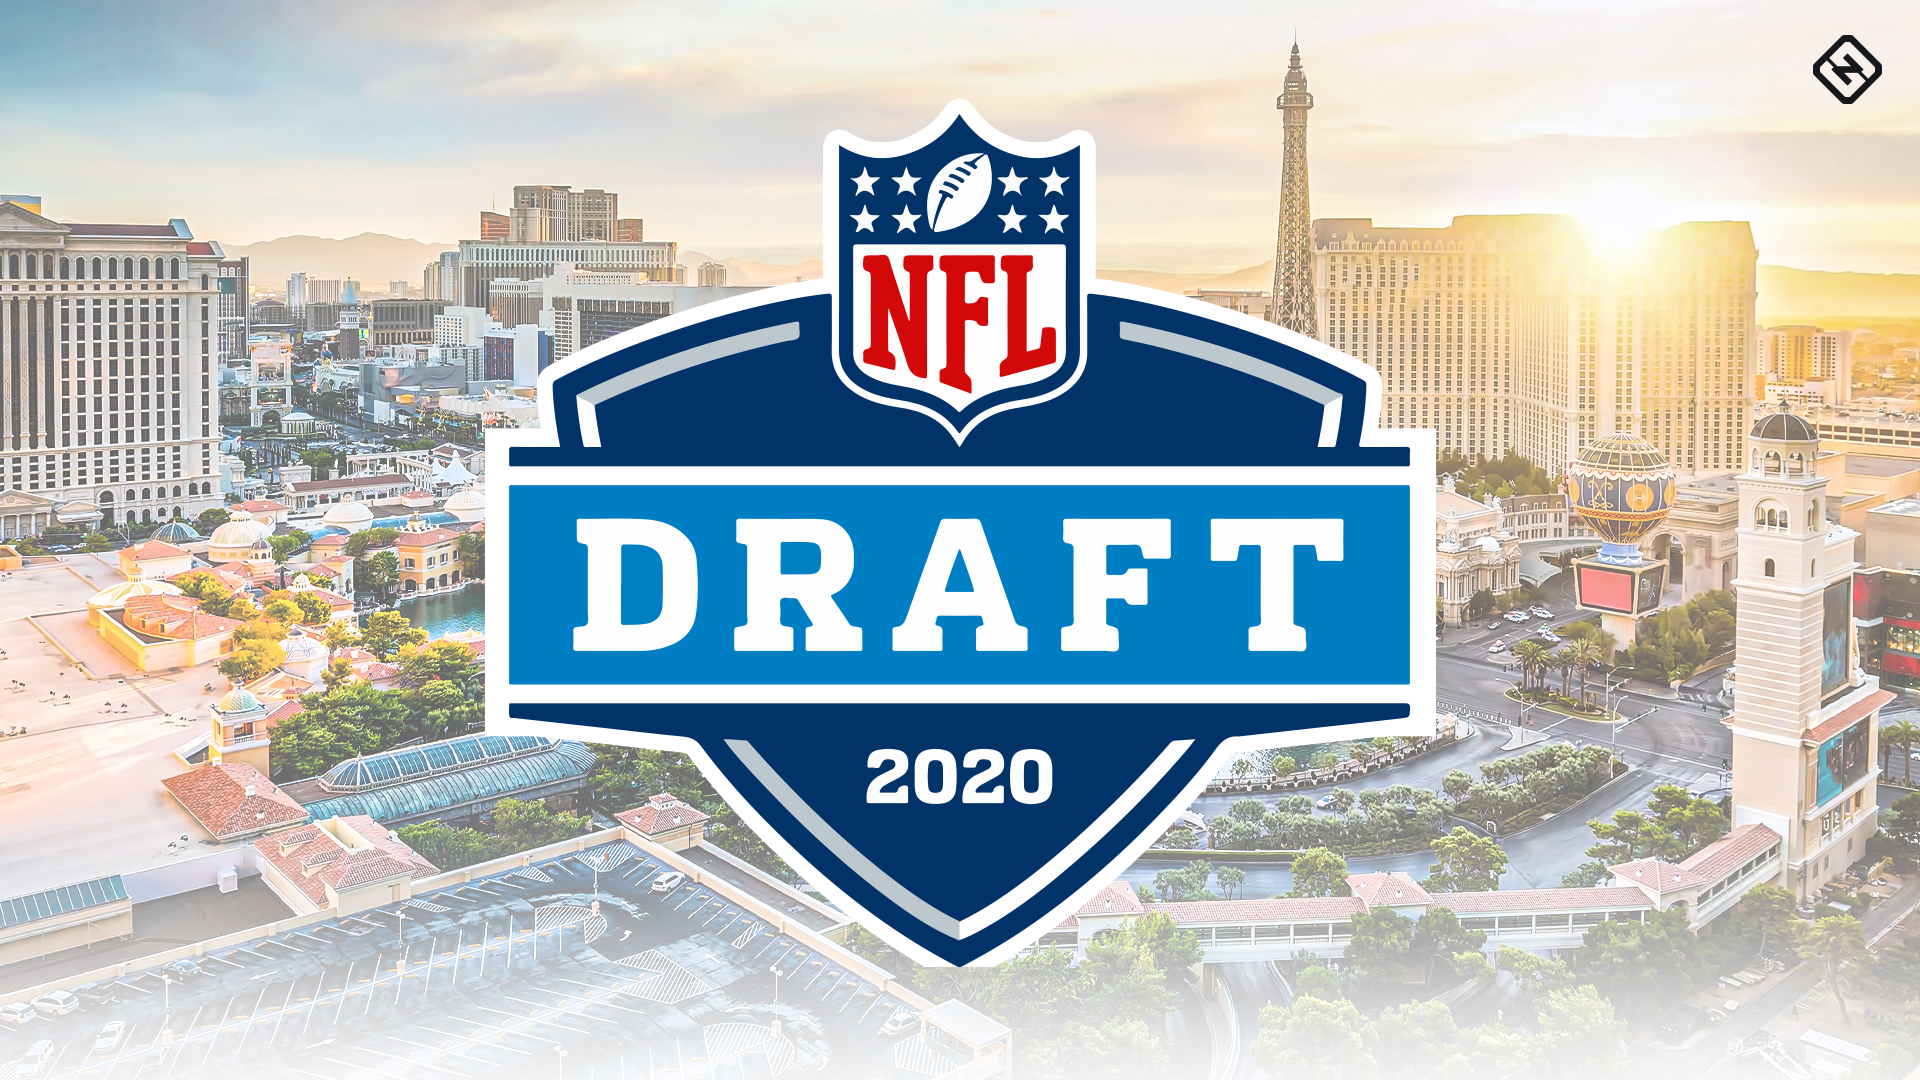 Draft NFL 2020 – Informations, programme, horaires et diffusion